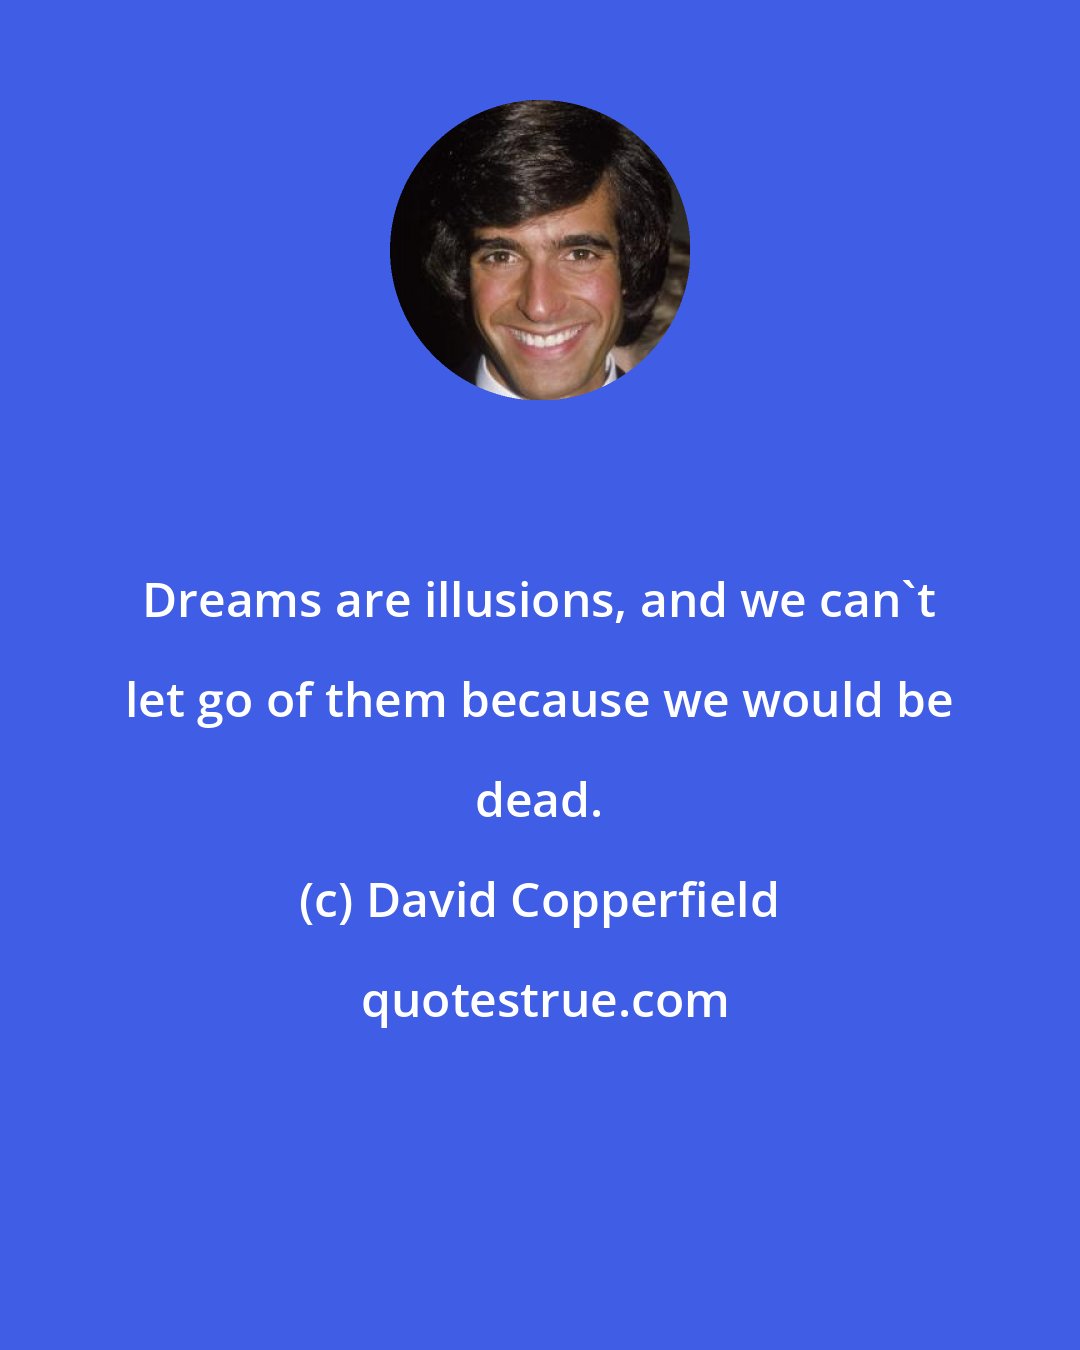 David Copperfield: Dreams are illusions, and we can't let go of them because we would be dead.